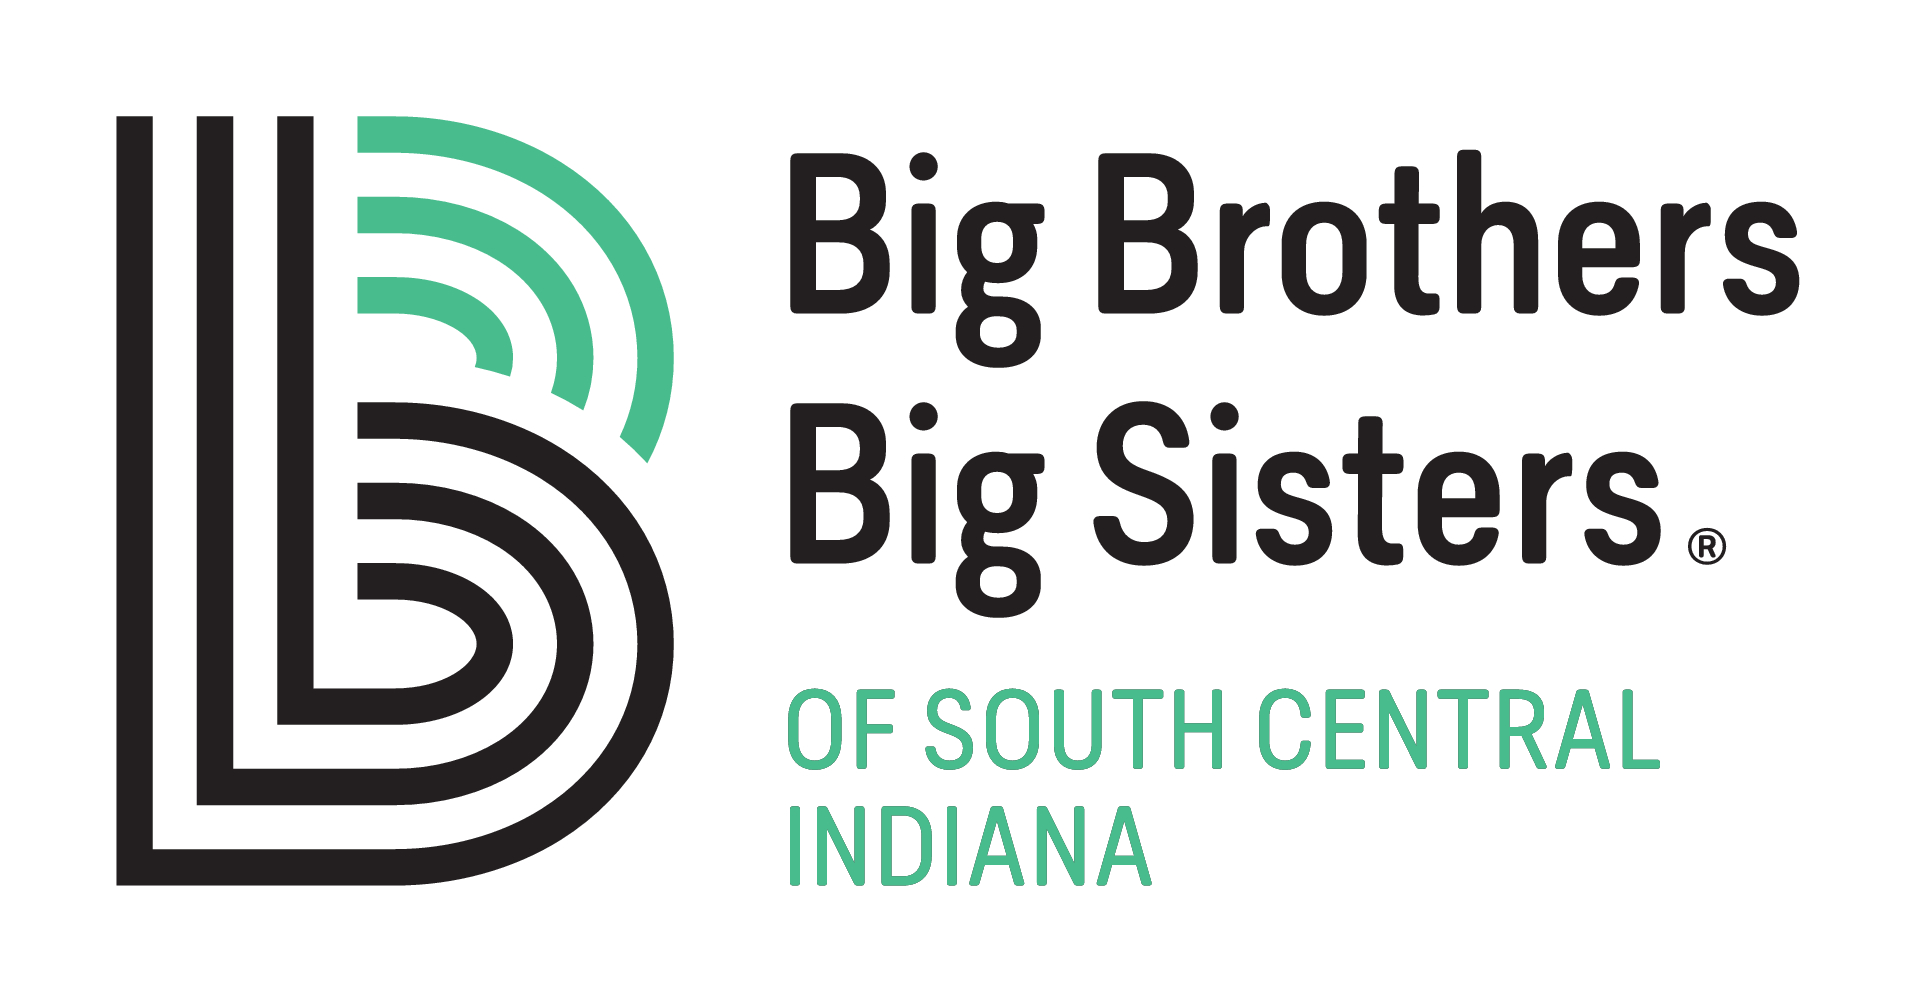 Big Brothers Big Sisters of South Central Indiana